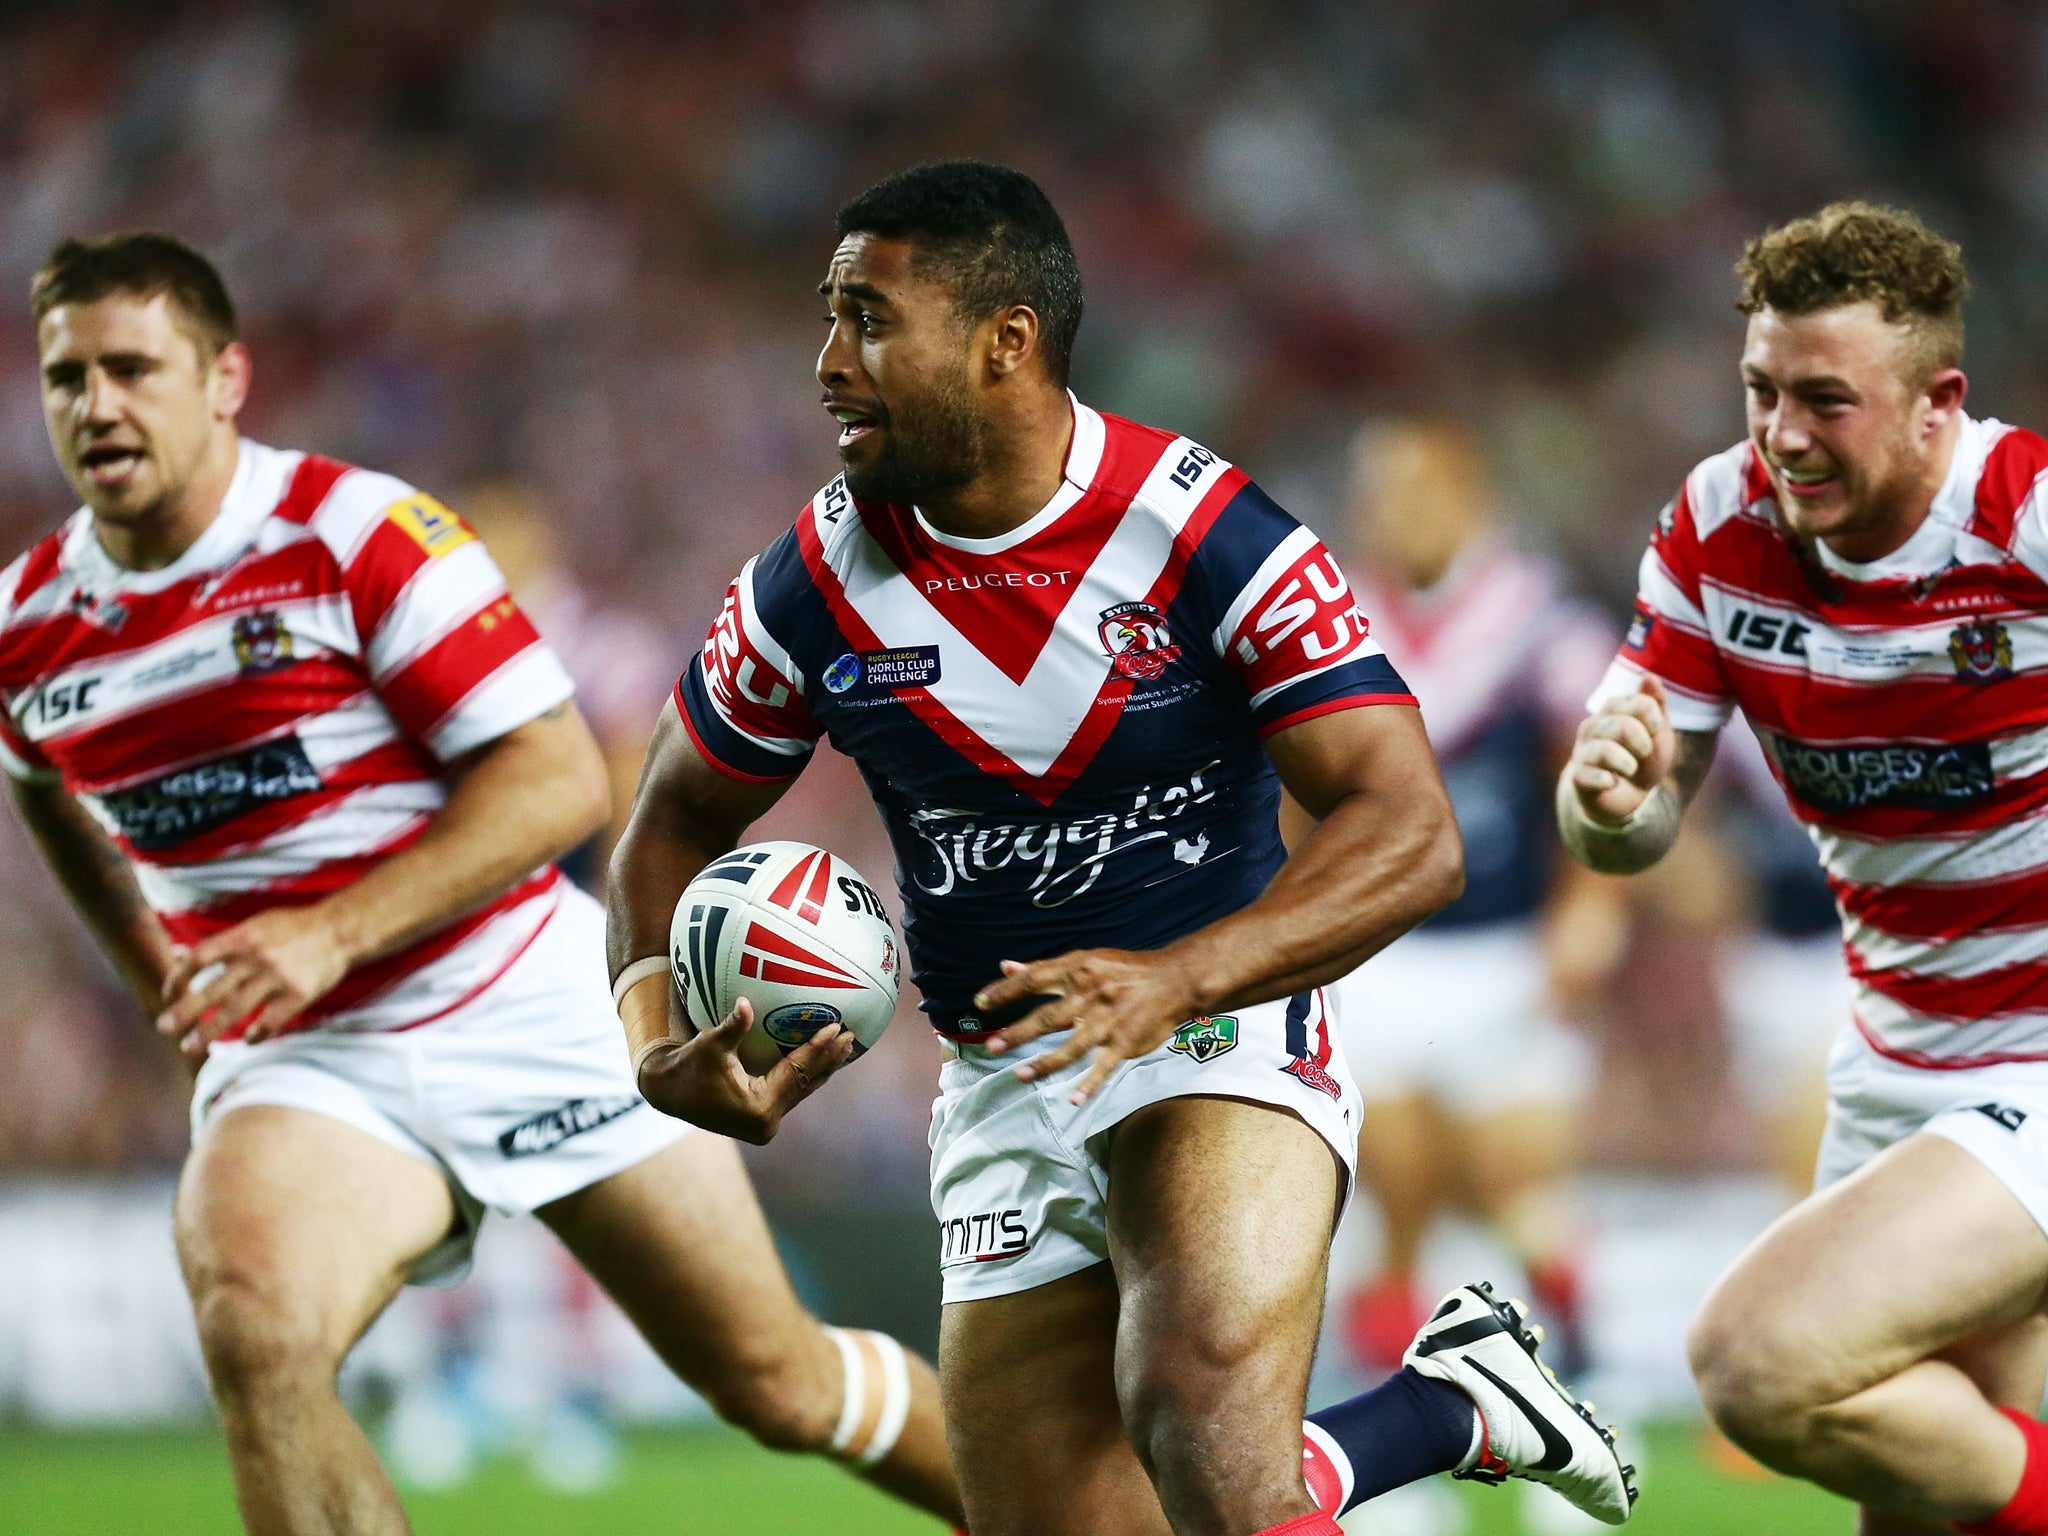 Michael Jennings scored three tries against Wigan in the World Club Challenge